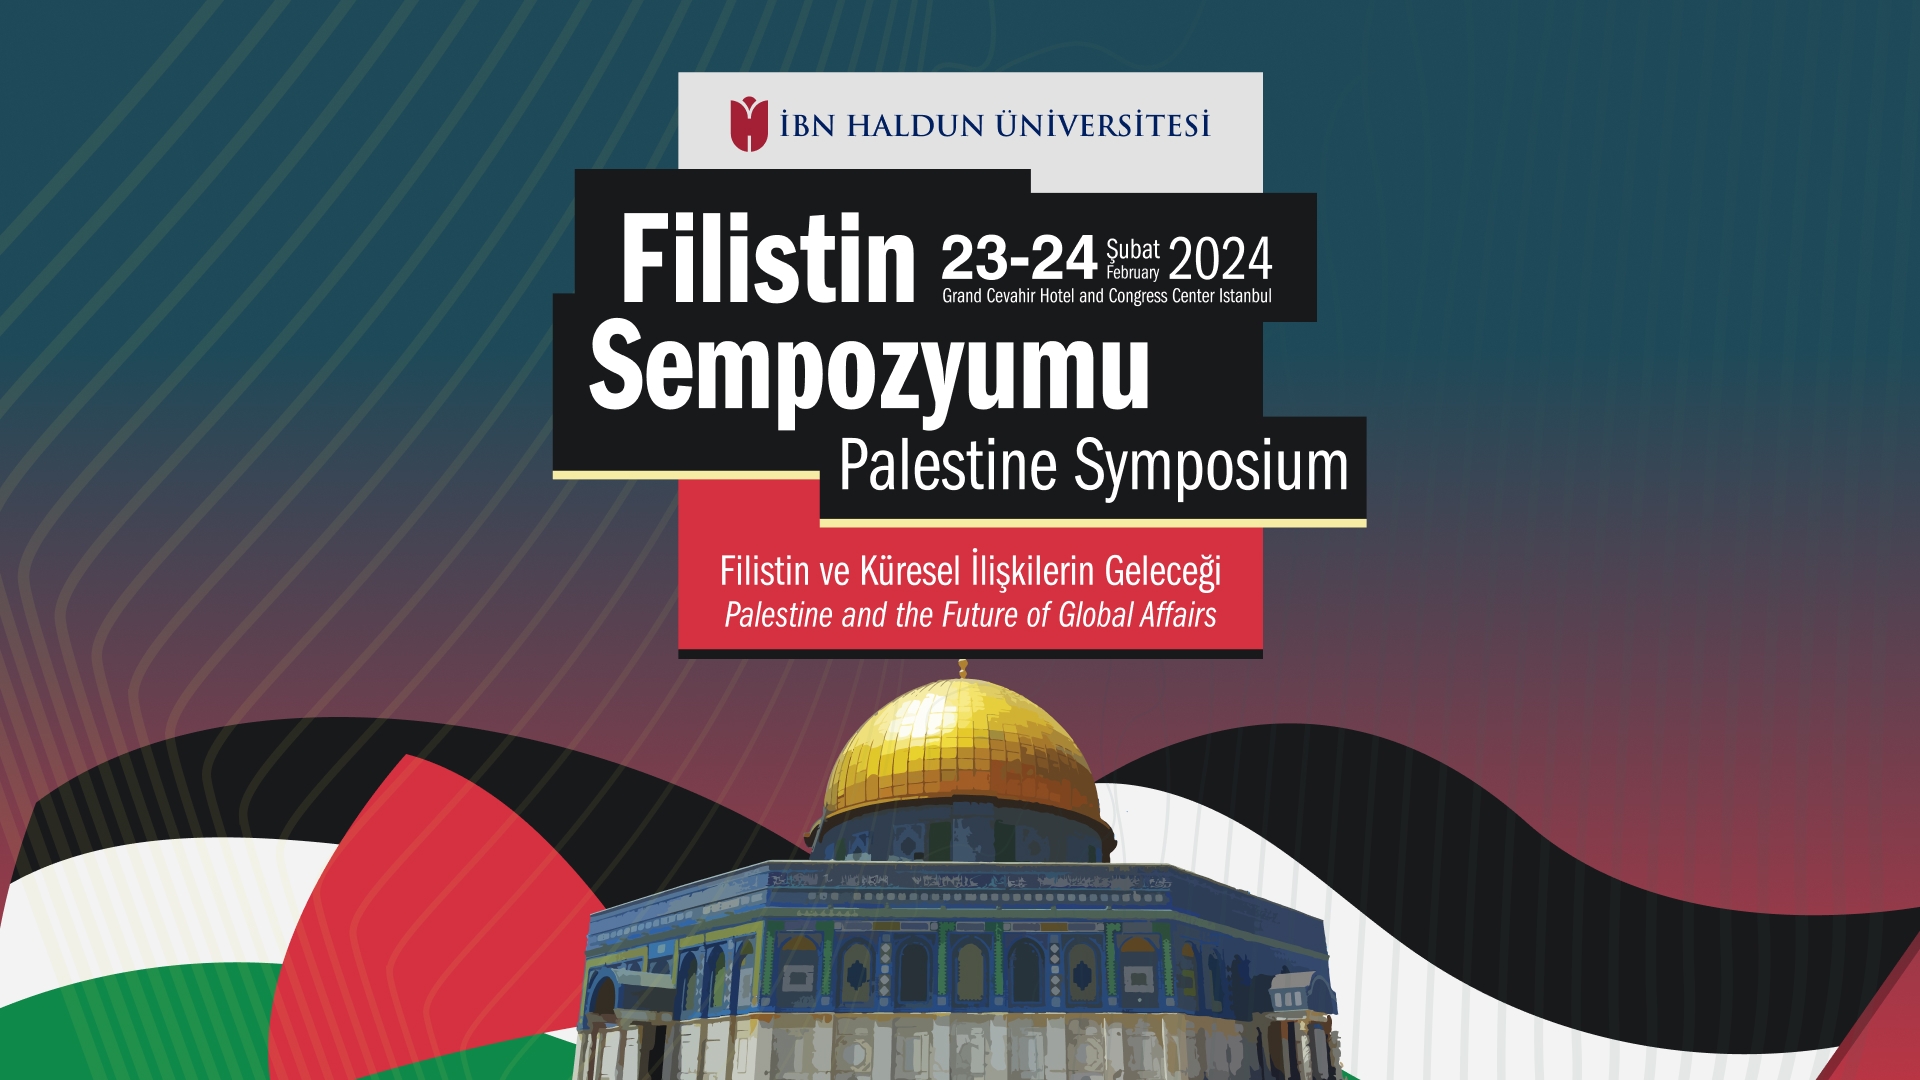 Palestine Symposium: Palestine and the Future of Global Relations